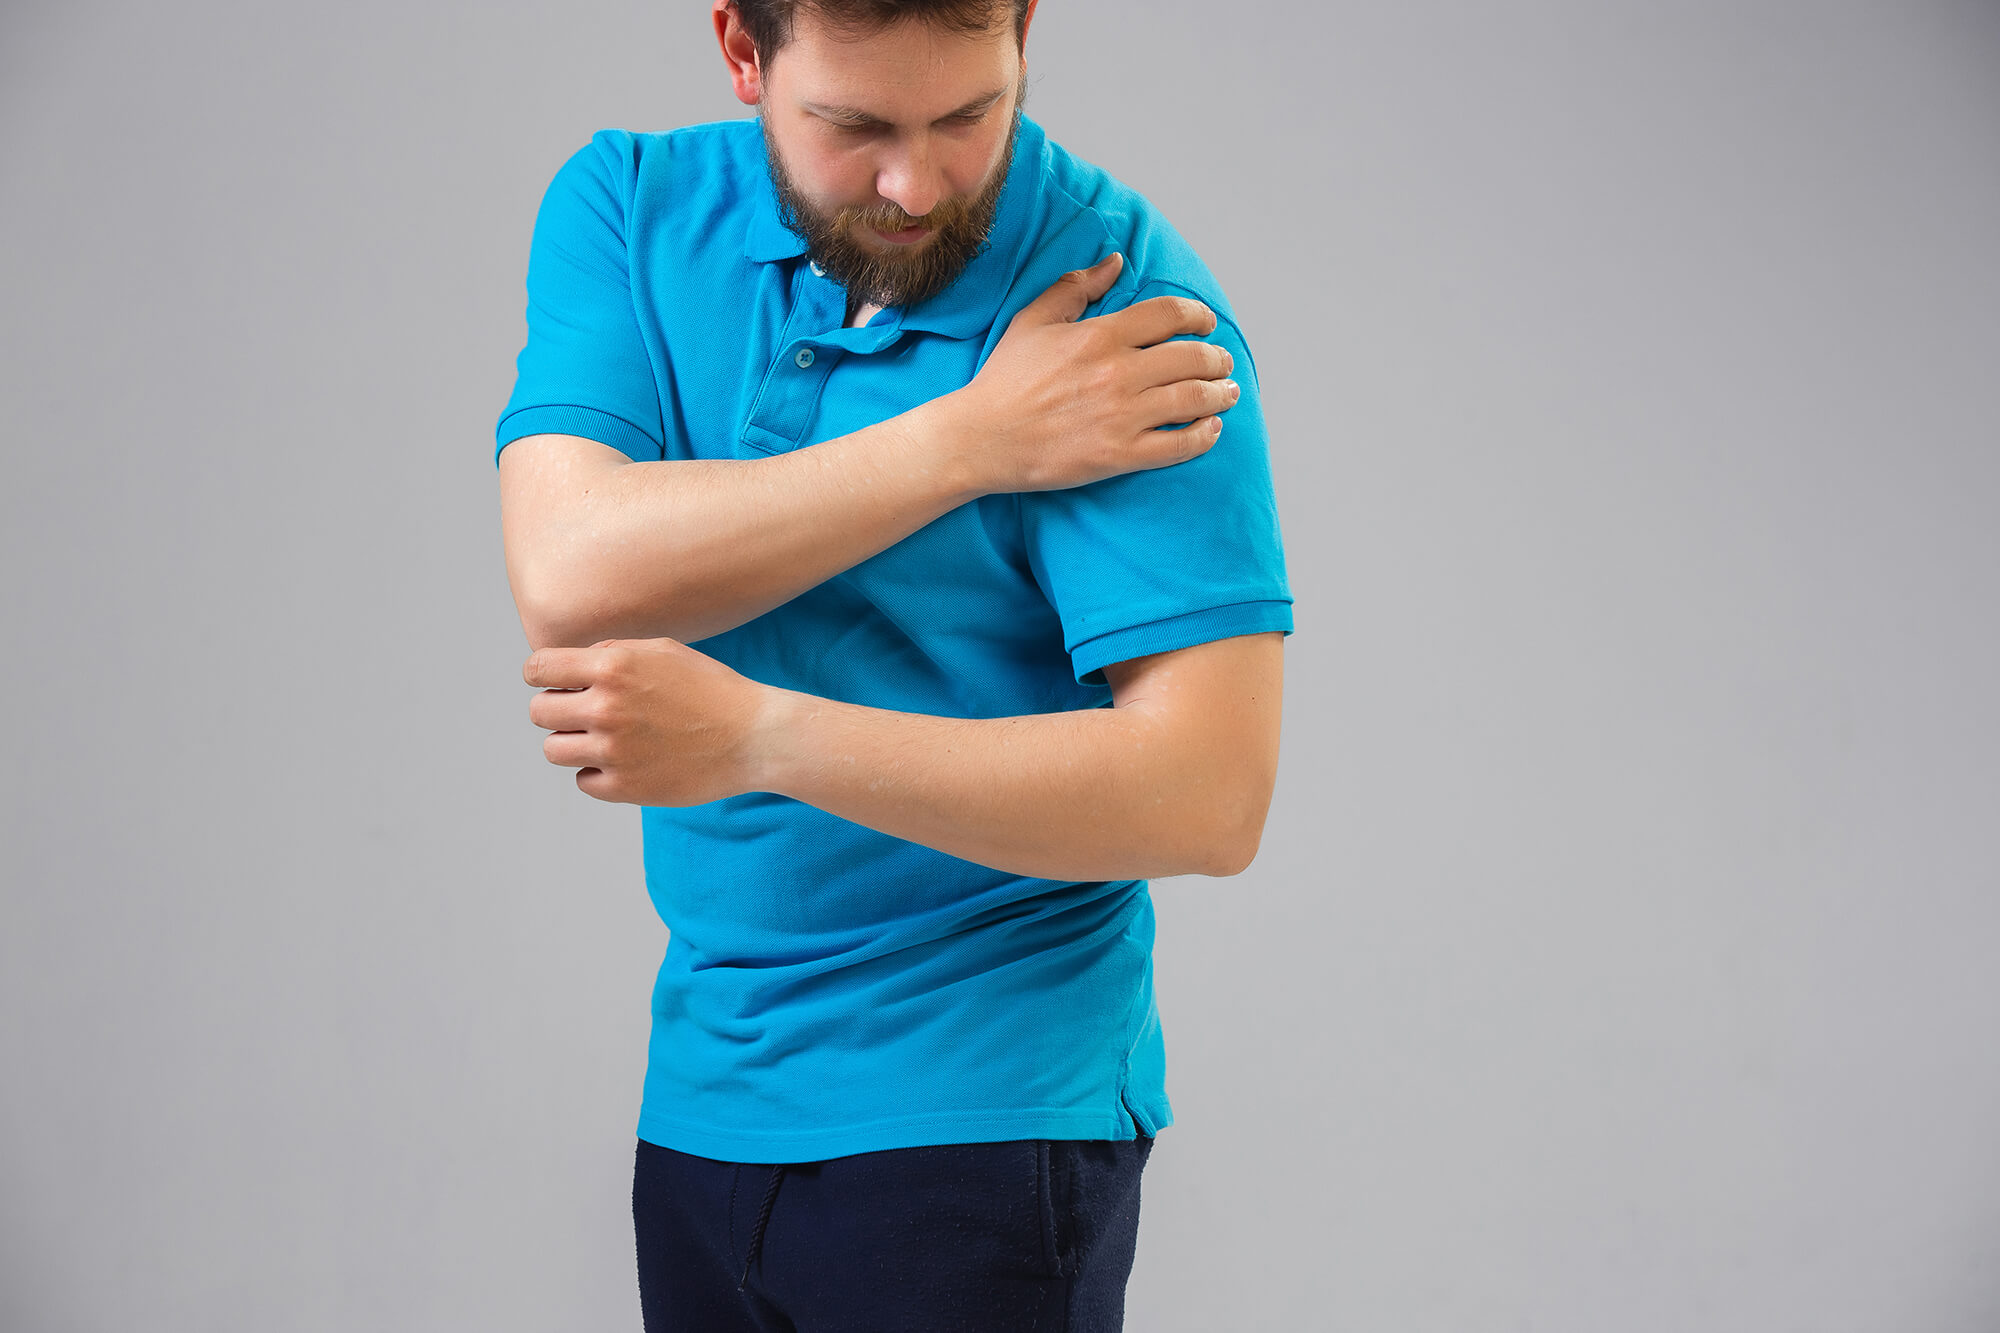 Tips for Treating and Preventing a Shoulder Dislocation